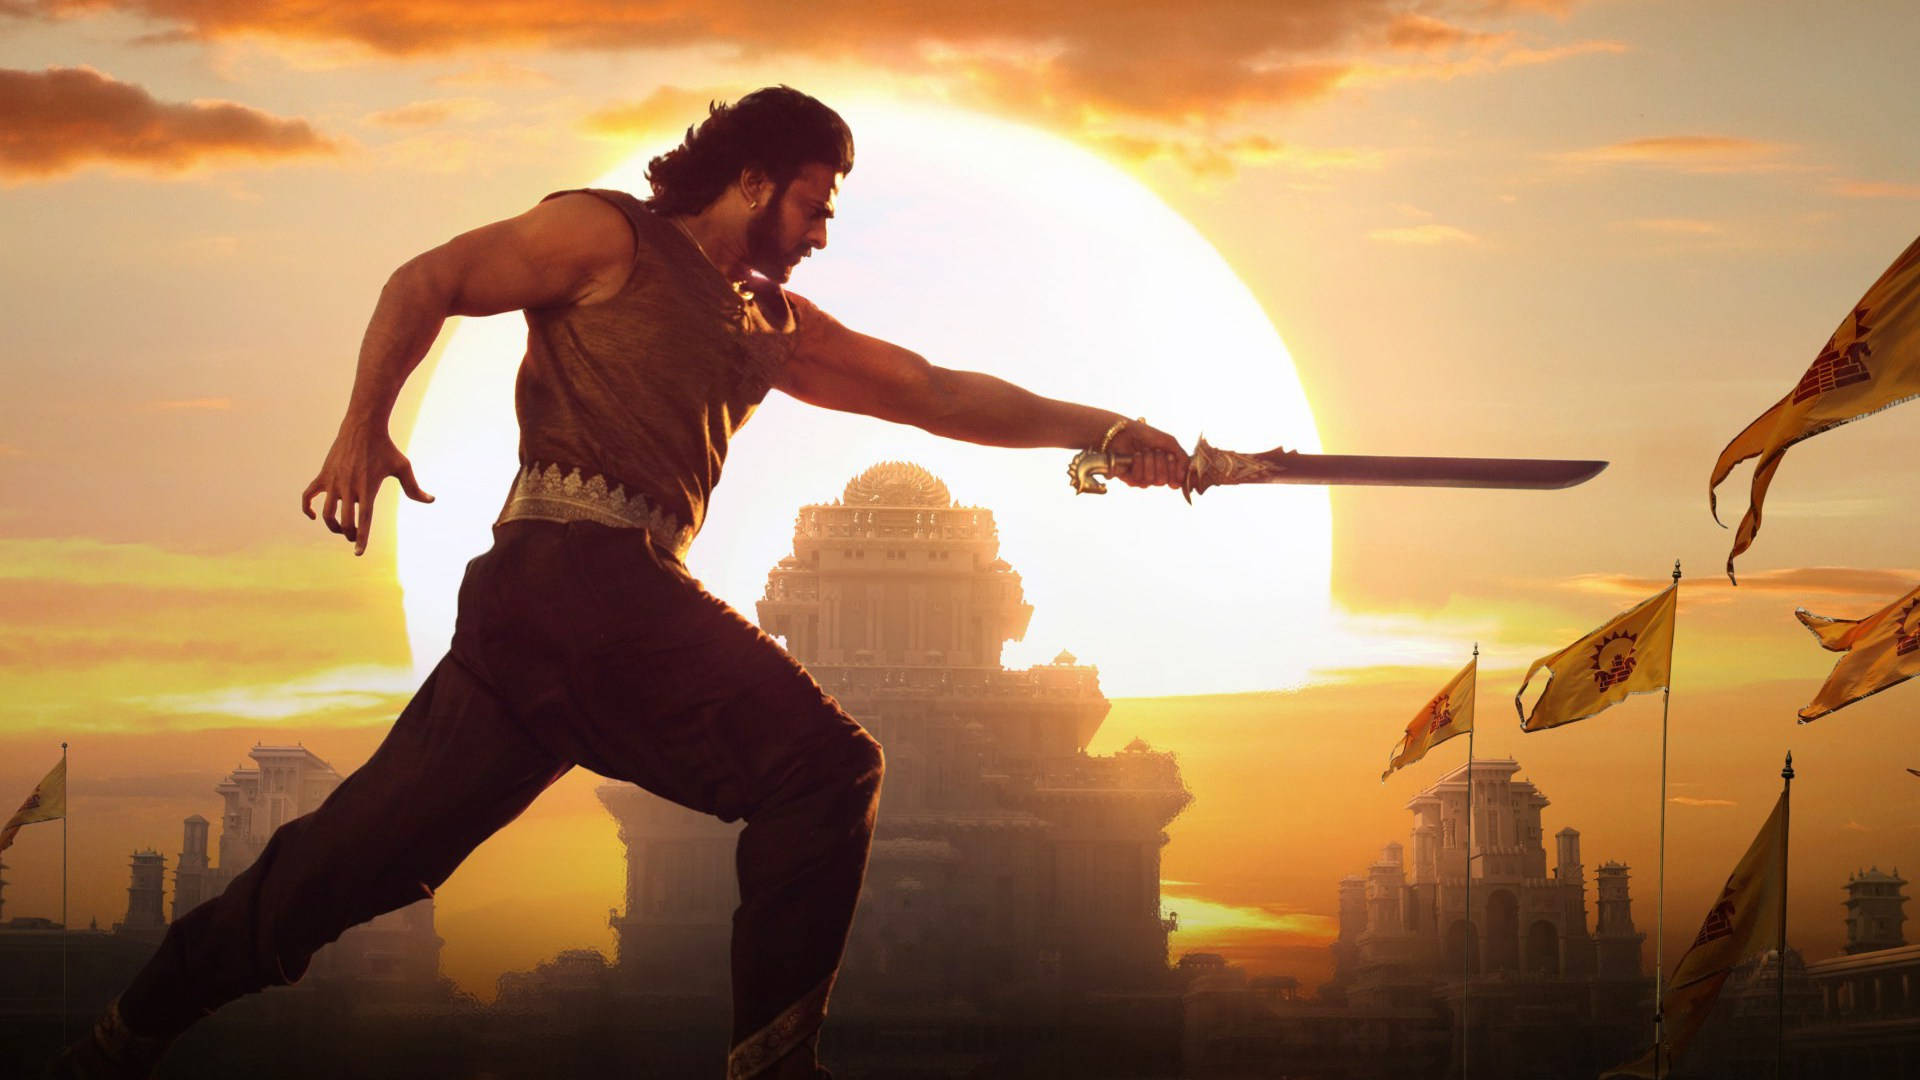 Download Prabhas Hd Training With A Sword Wallpaper 